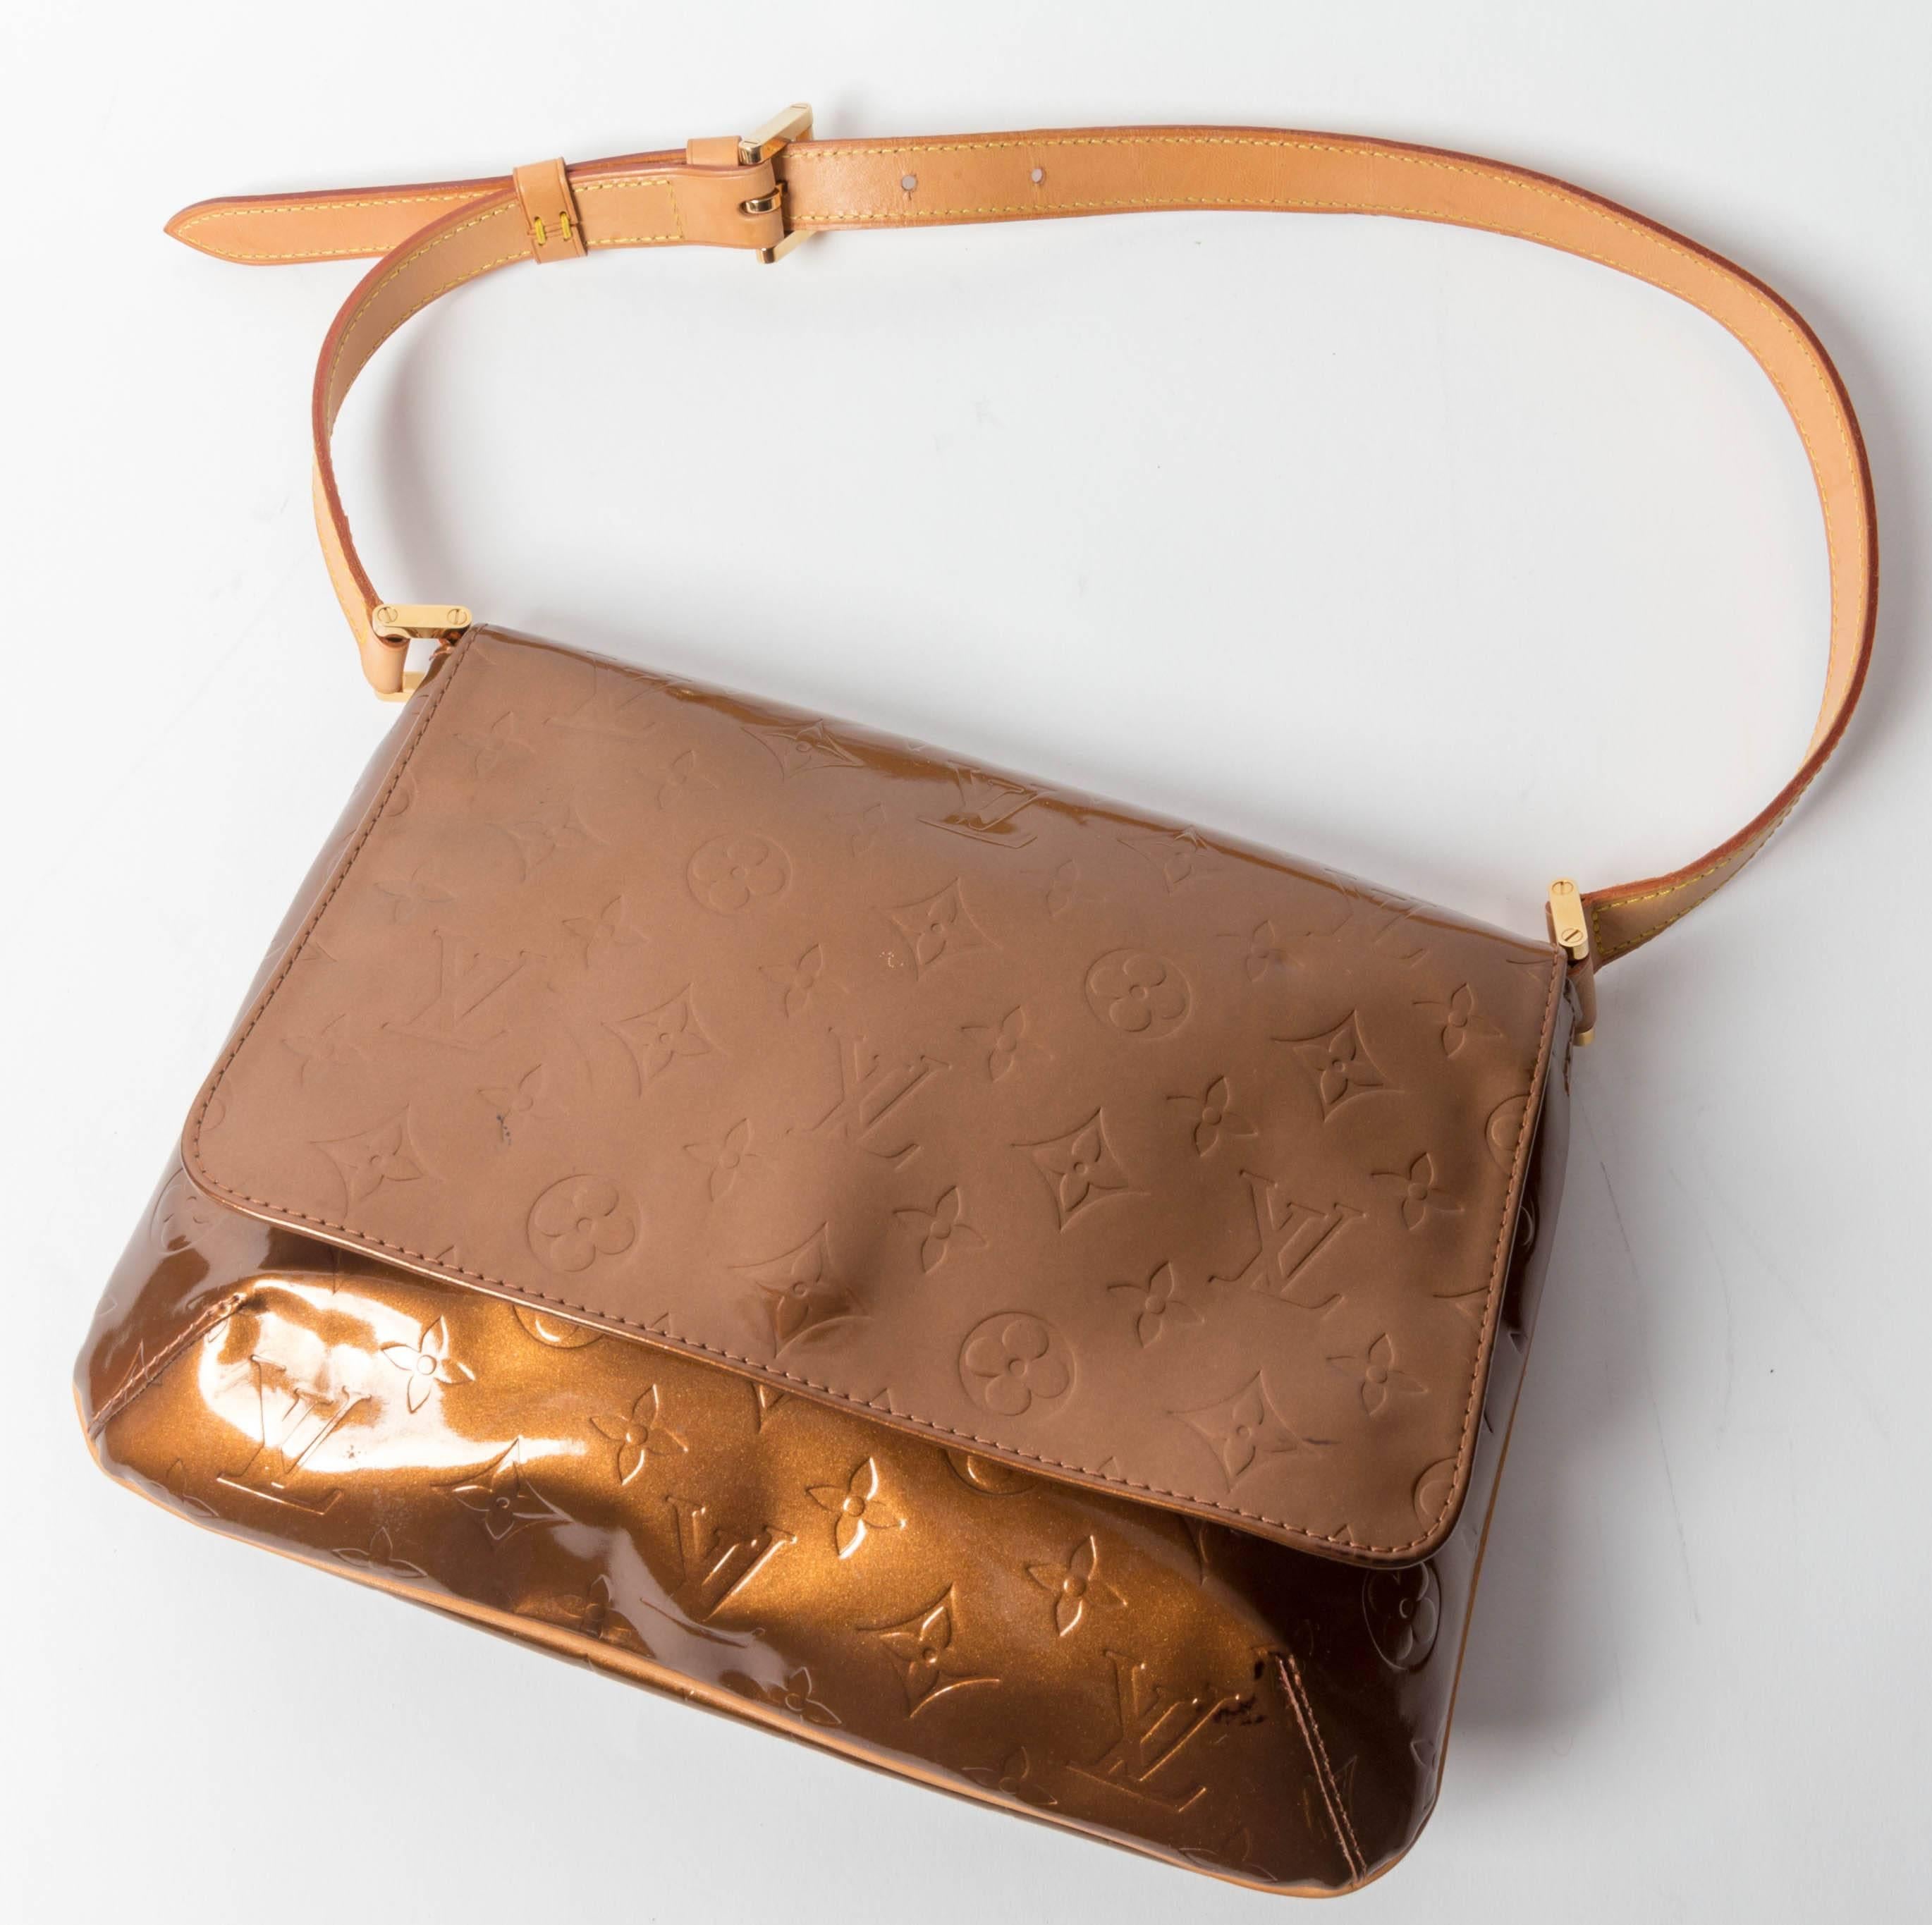 Louis Vuitton Bronze Thompson Street Vernis Shoulder Bag
There are two small areas of color transfer.
Otherwise excellent condition.
Adjustable shoulder strap.
One flap pocket.